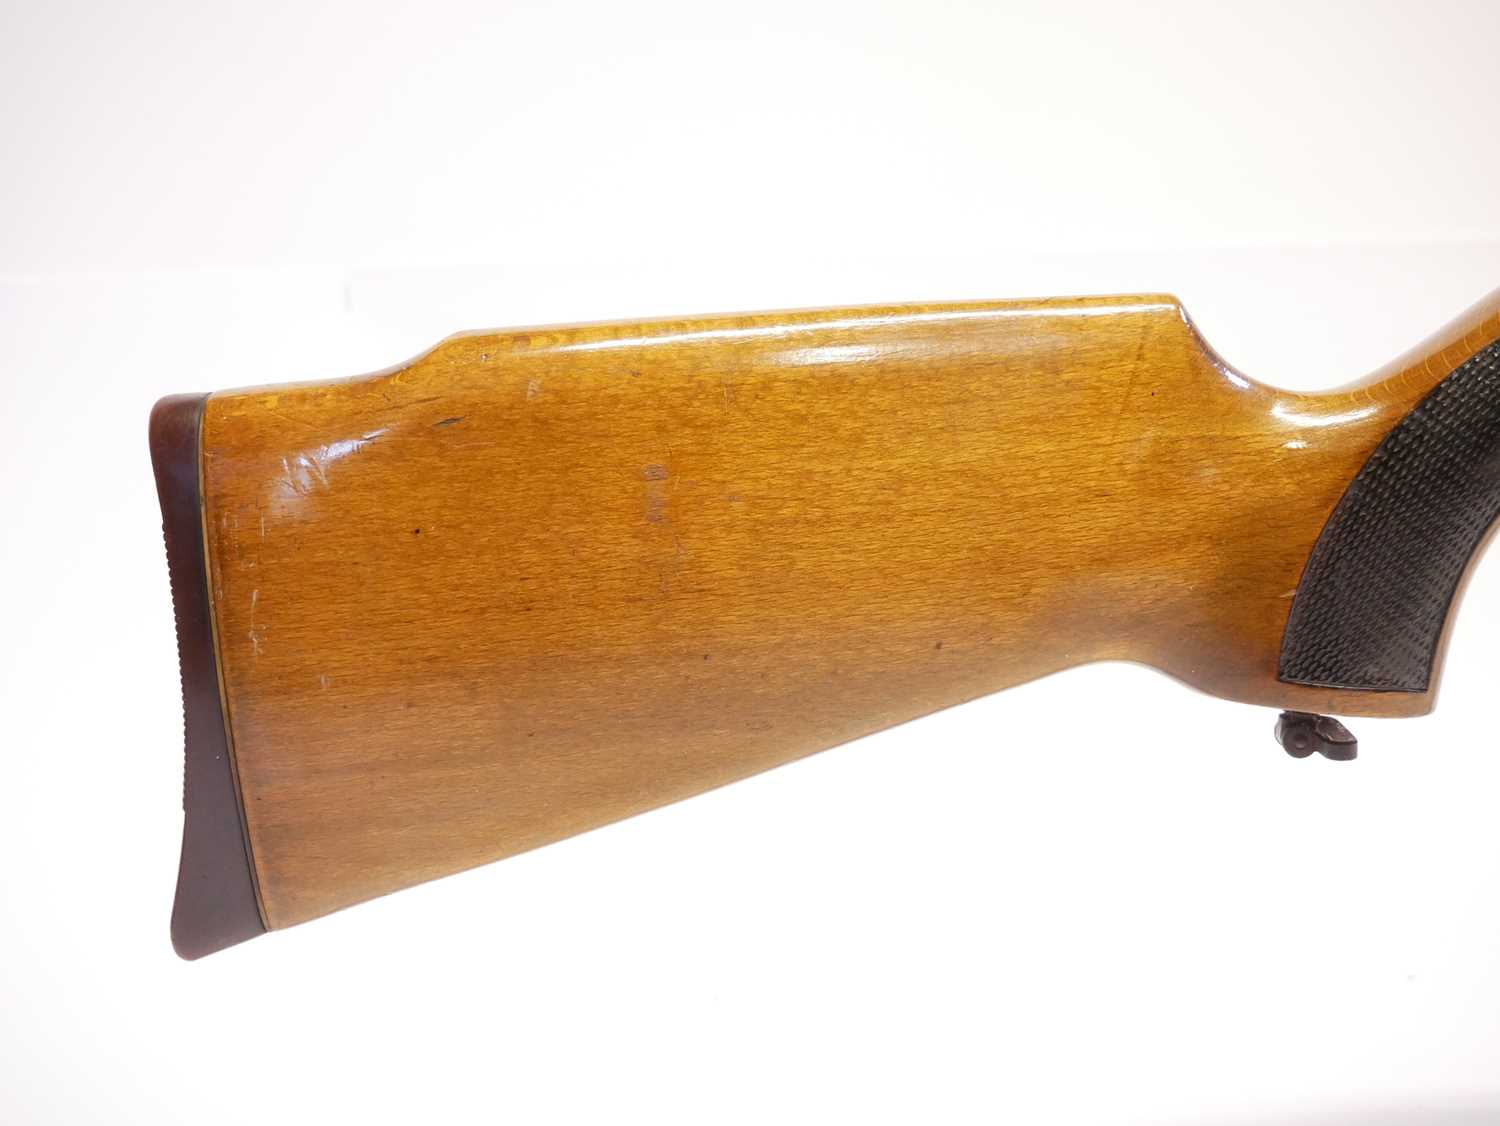 Original model 50 .22 air rifle, serial number 71371623, 18.5 inch barrel with tunnel front sight - Image 3 of 13